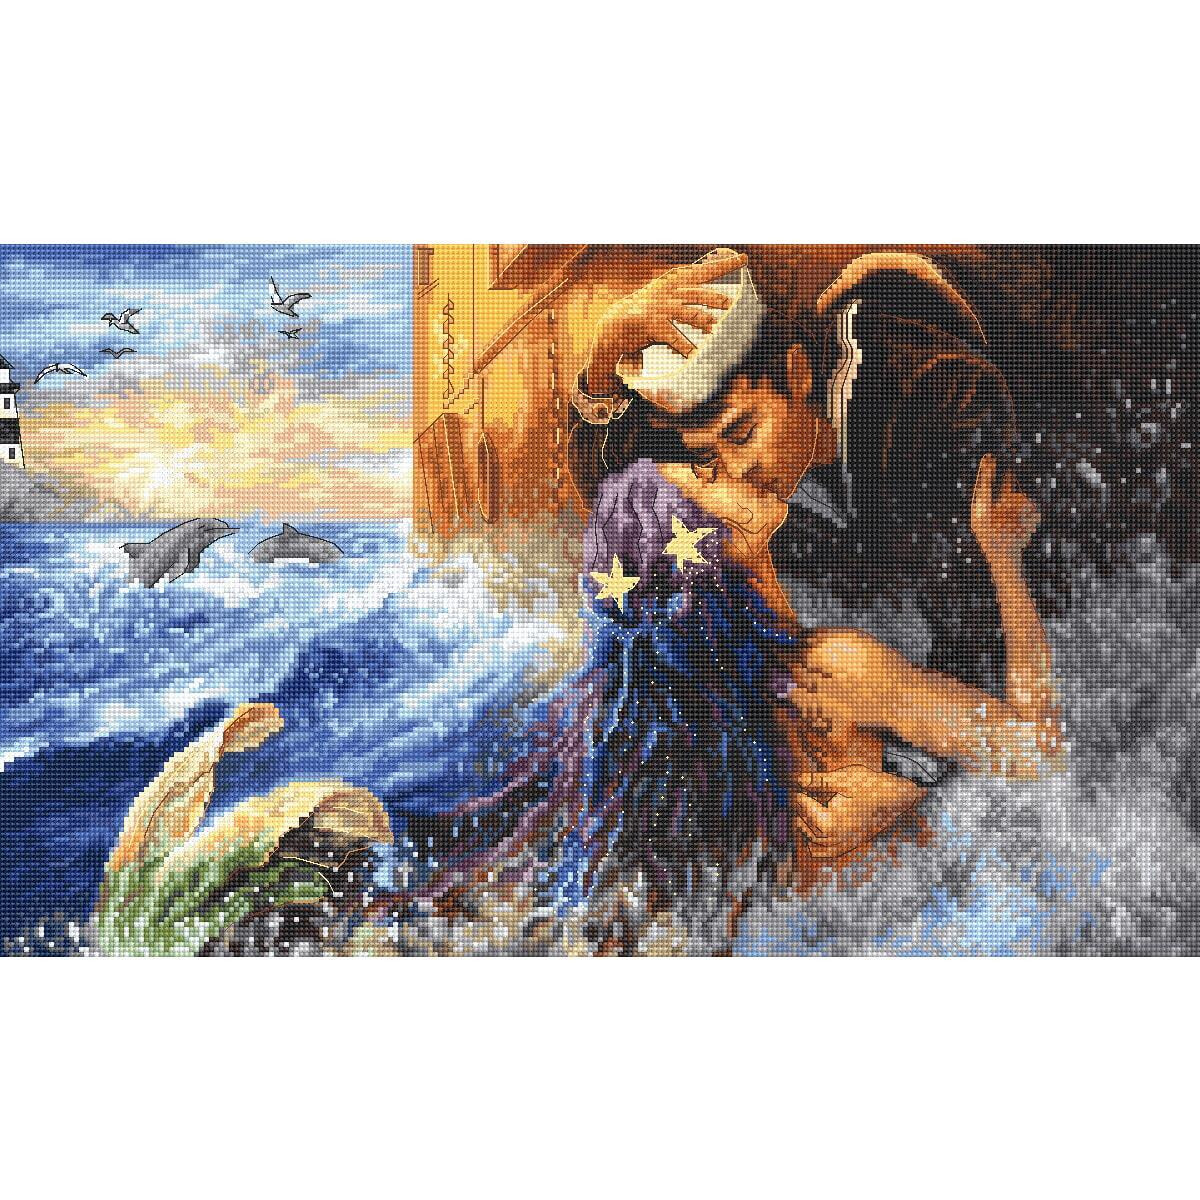 A vibrant, pixelated image of a mermaid embracing and...